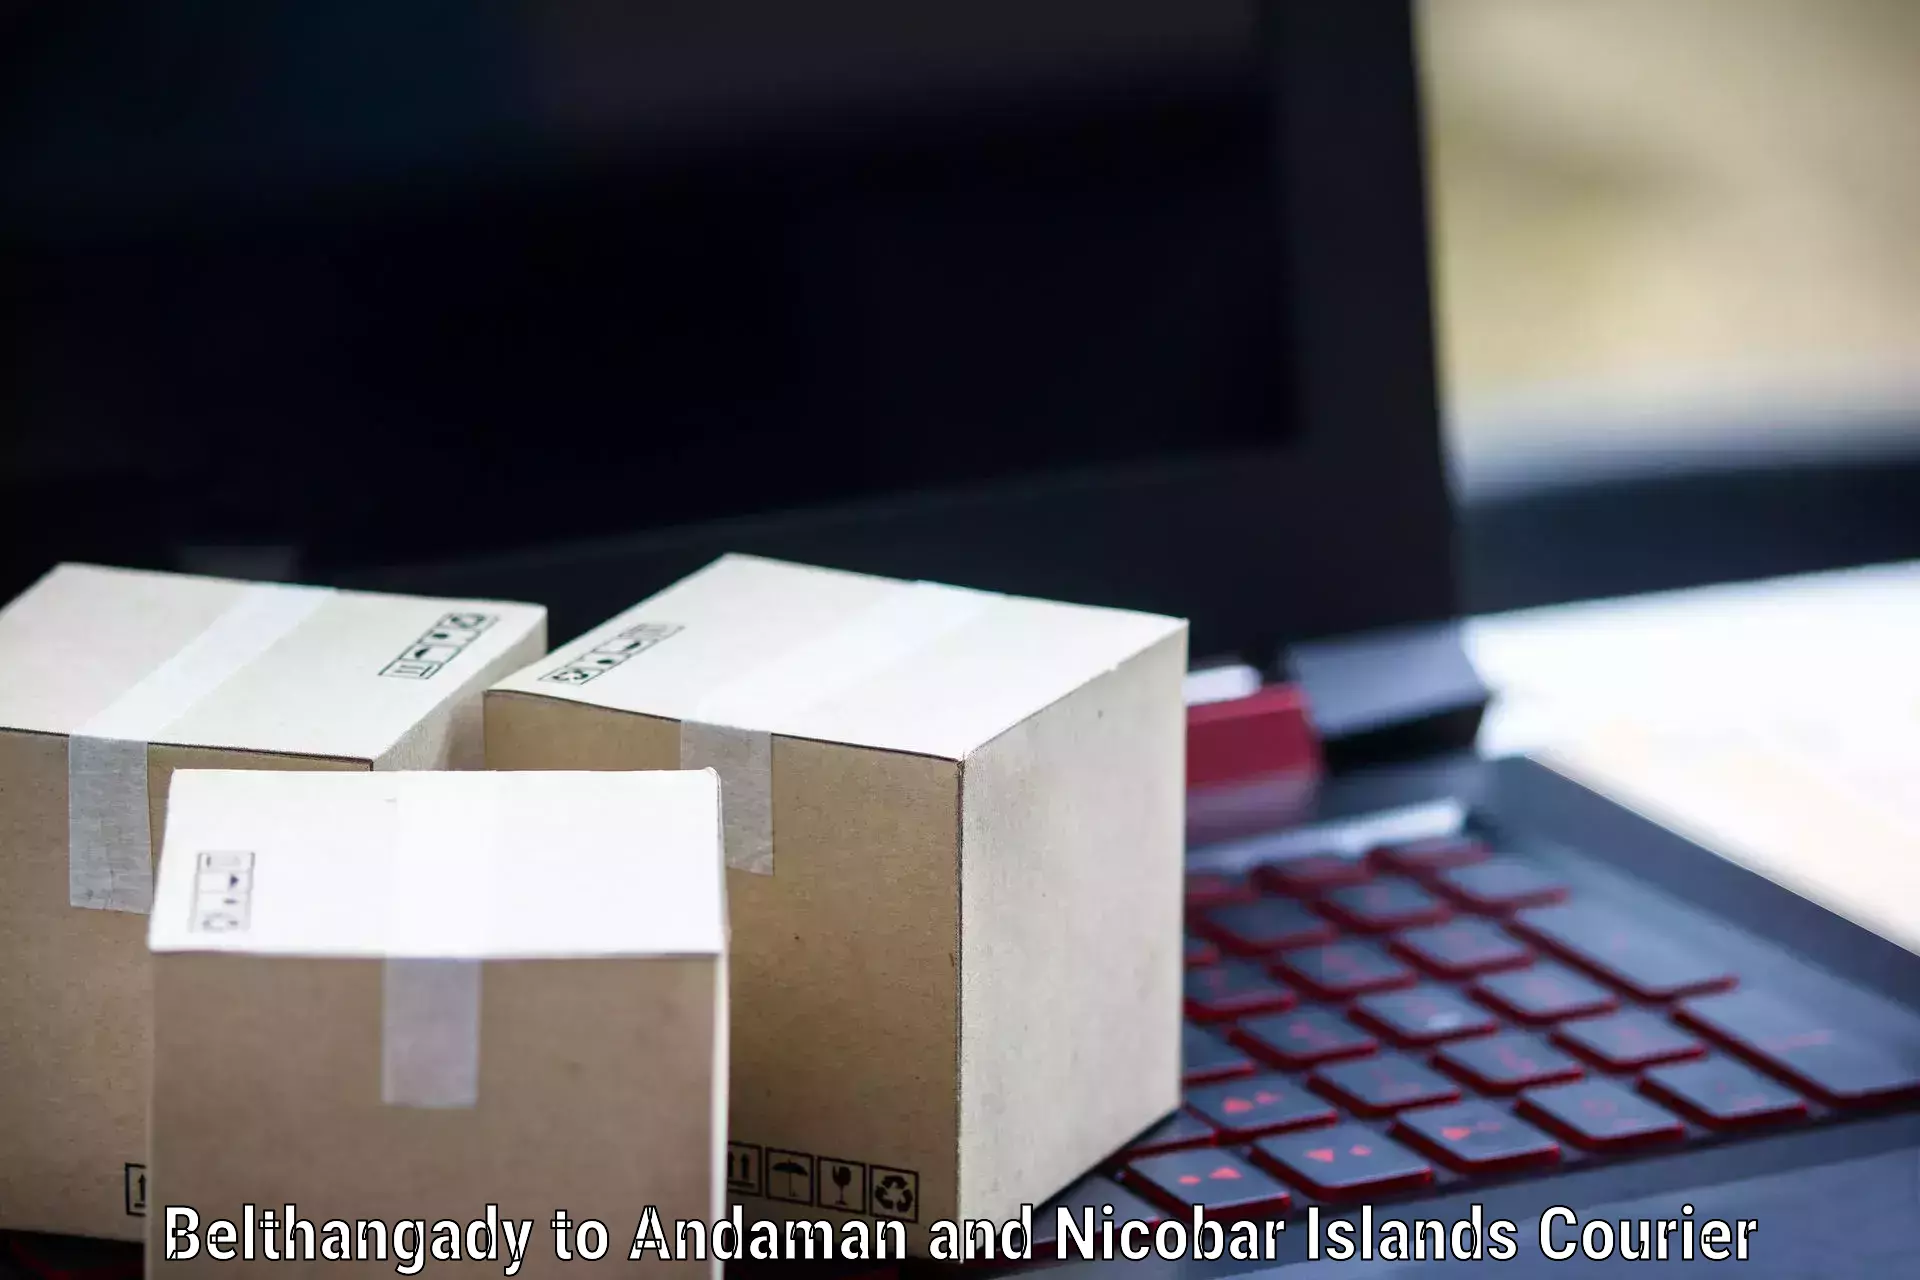 Speedy delivery service Belthangady to Andaman and Nicobar Islands